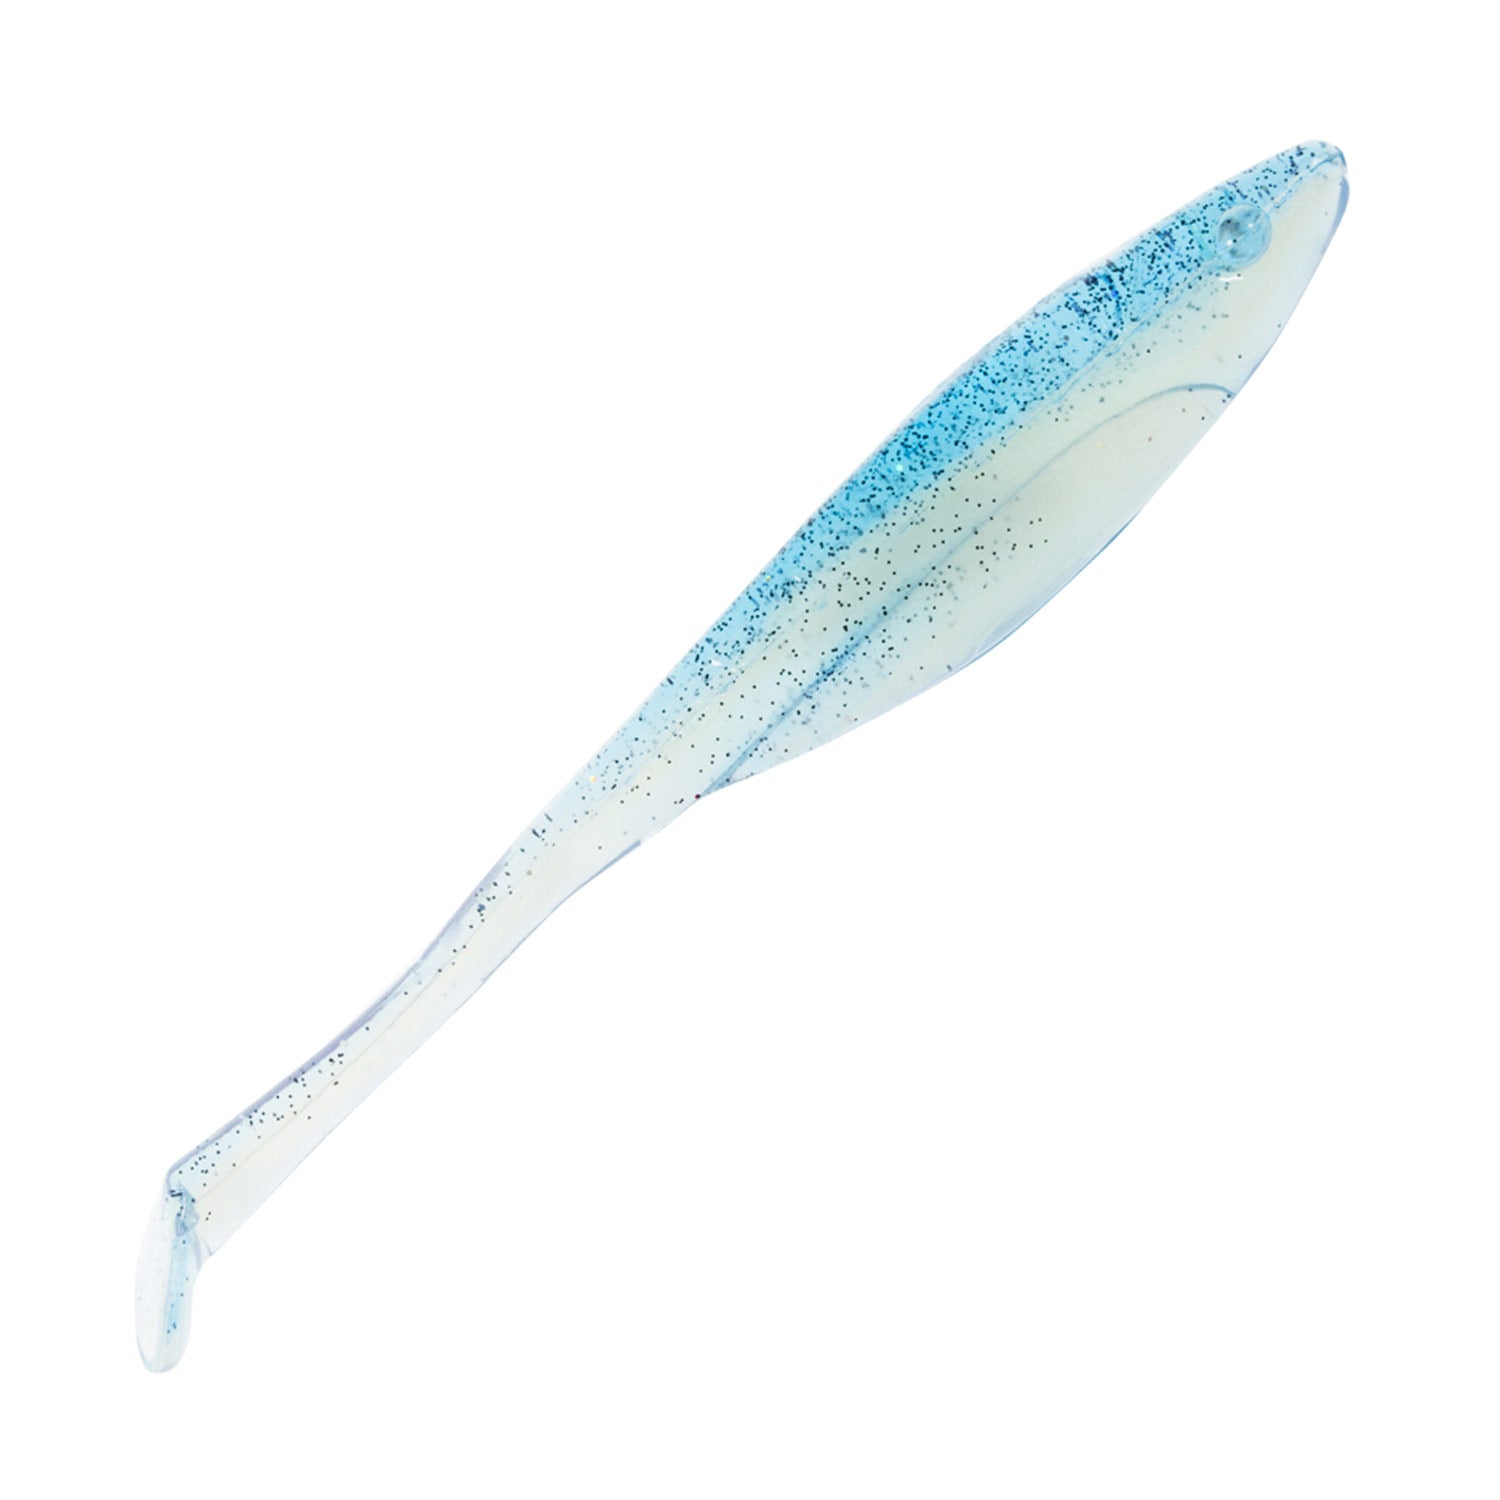 Charlie's Worms Twitchin' Shad Blue Back Shad